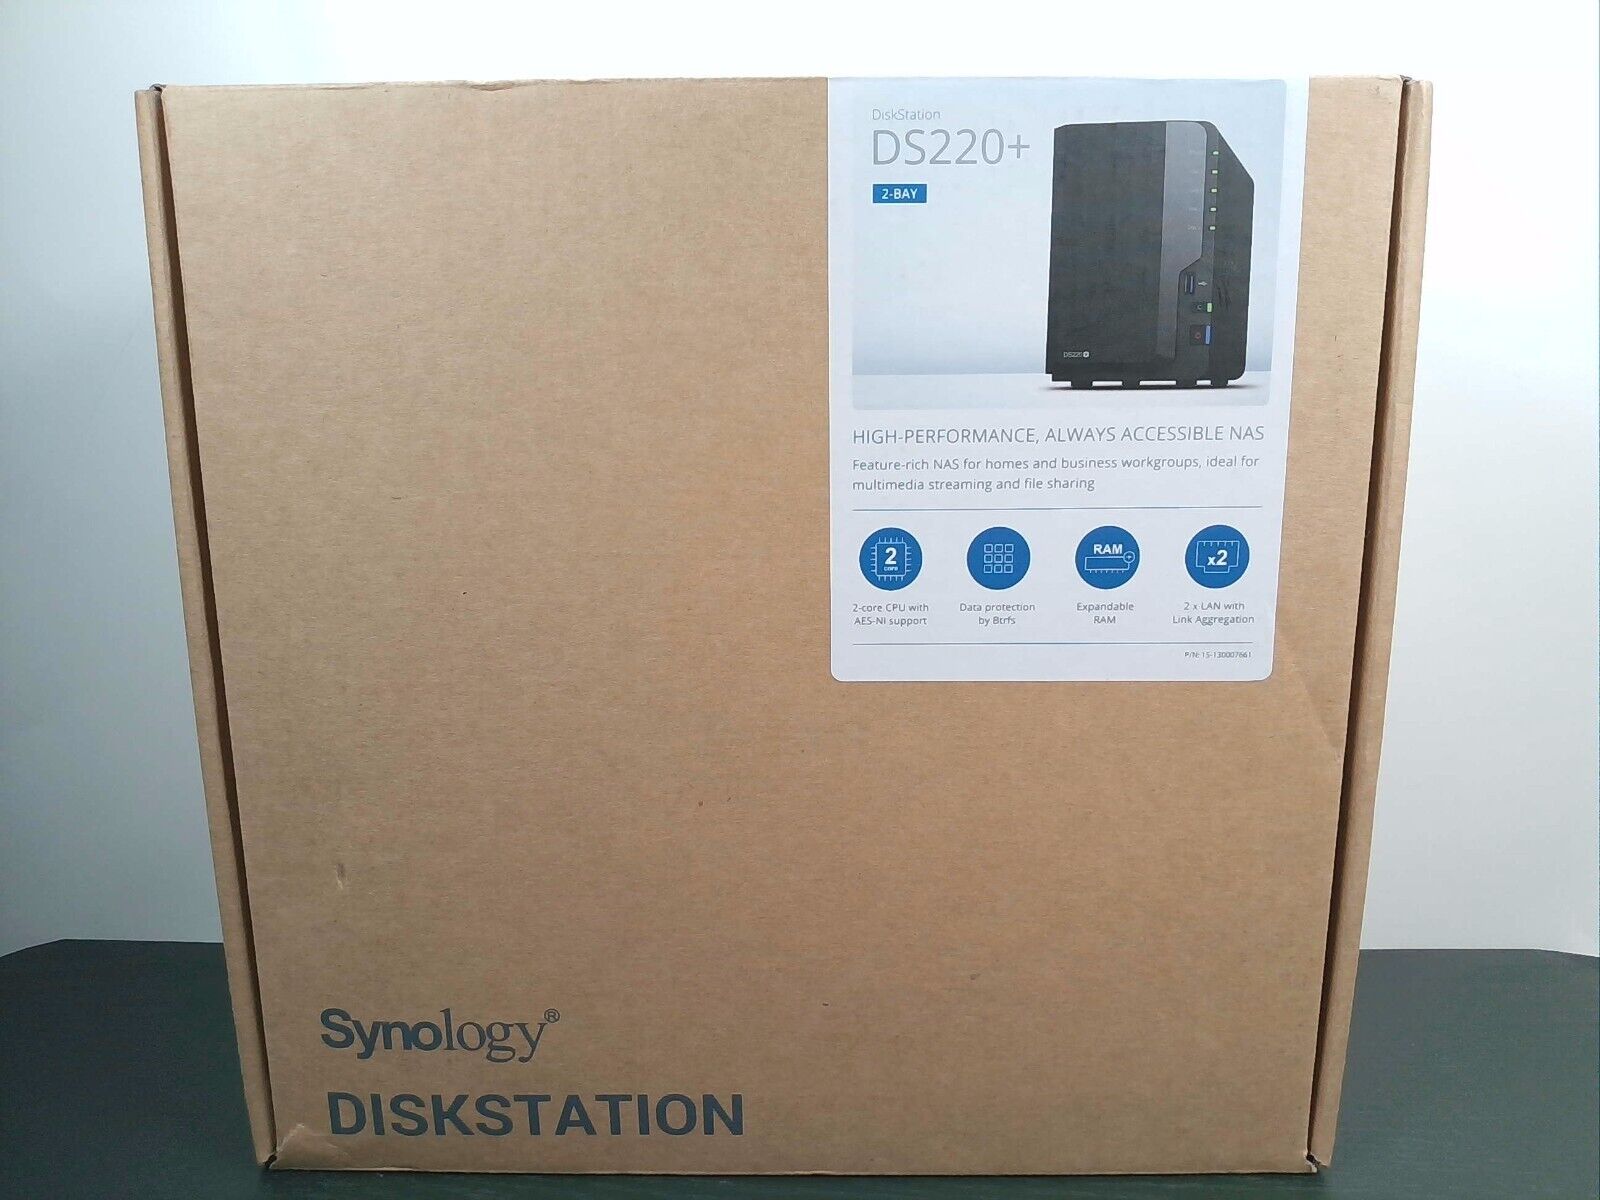 Synology - DiskStation DS220+ - 2-BAY - NO ADDED MEMORY - OPENBOX